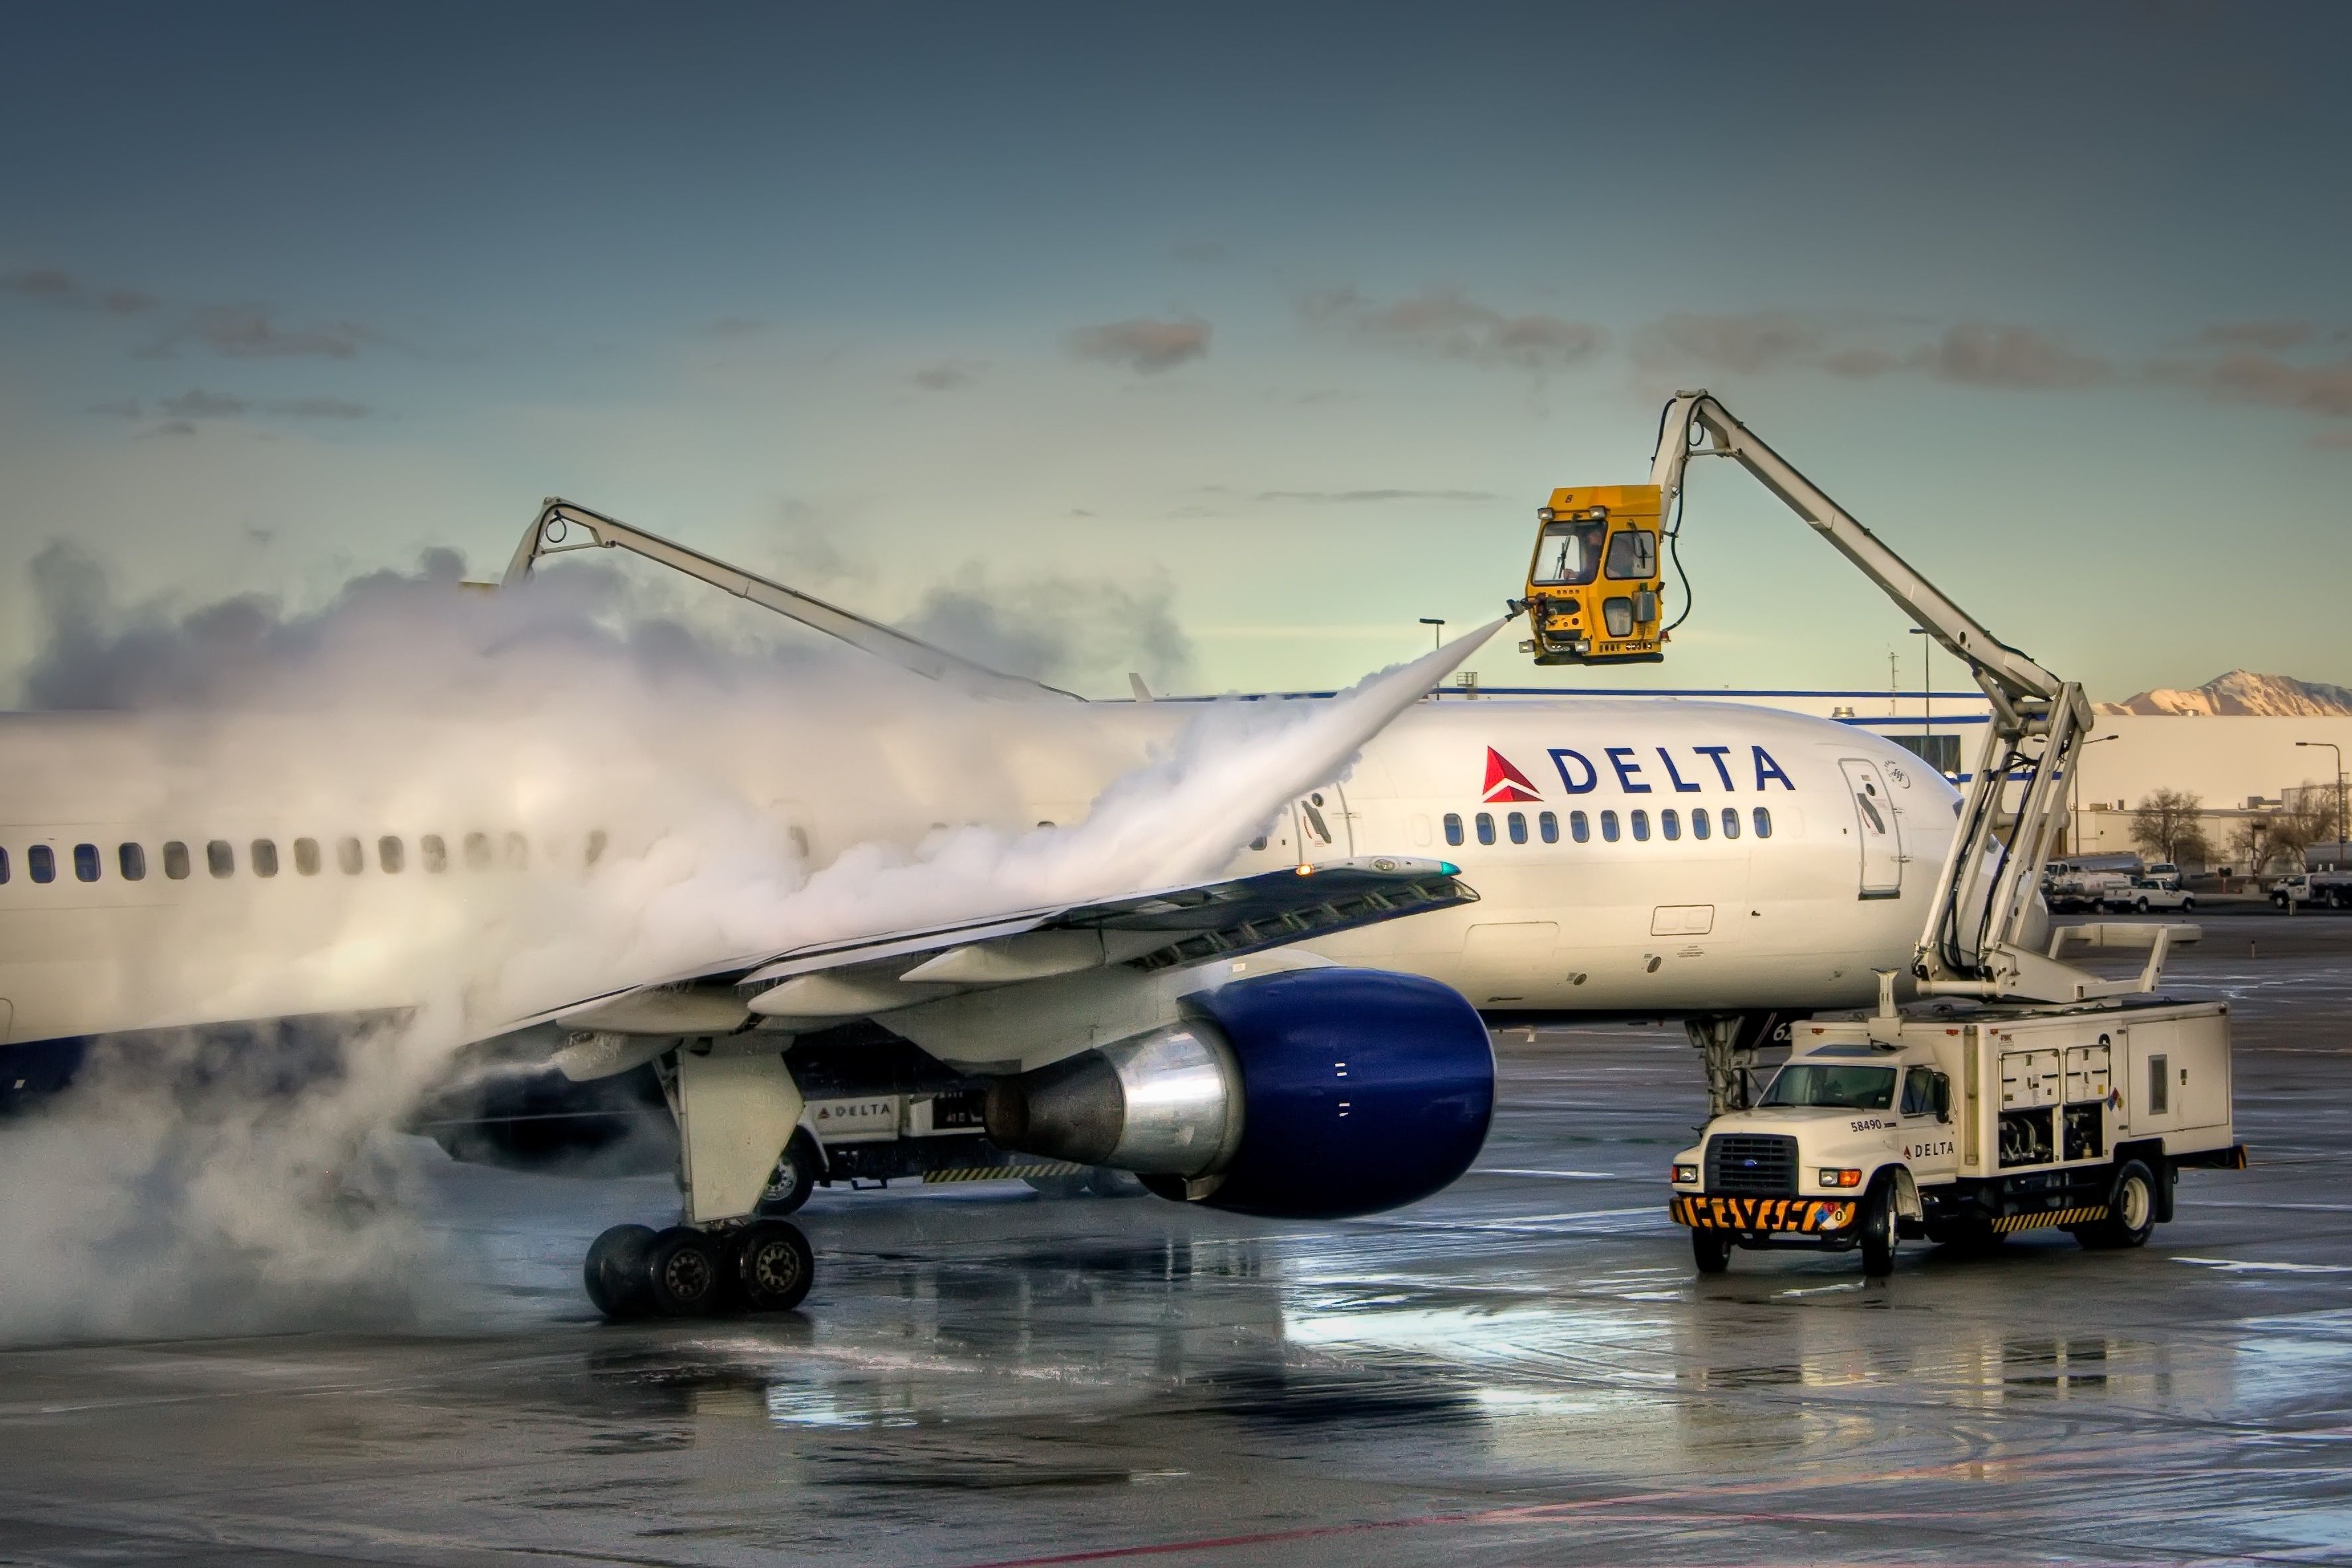 Delta Air Lines Boeing 757-200 being deiced.